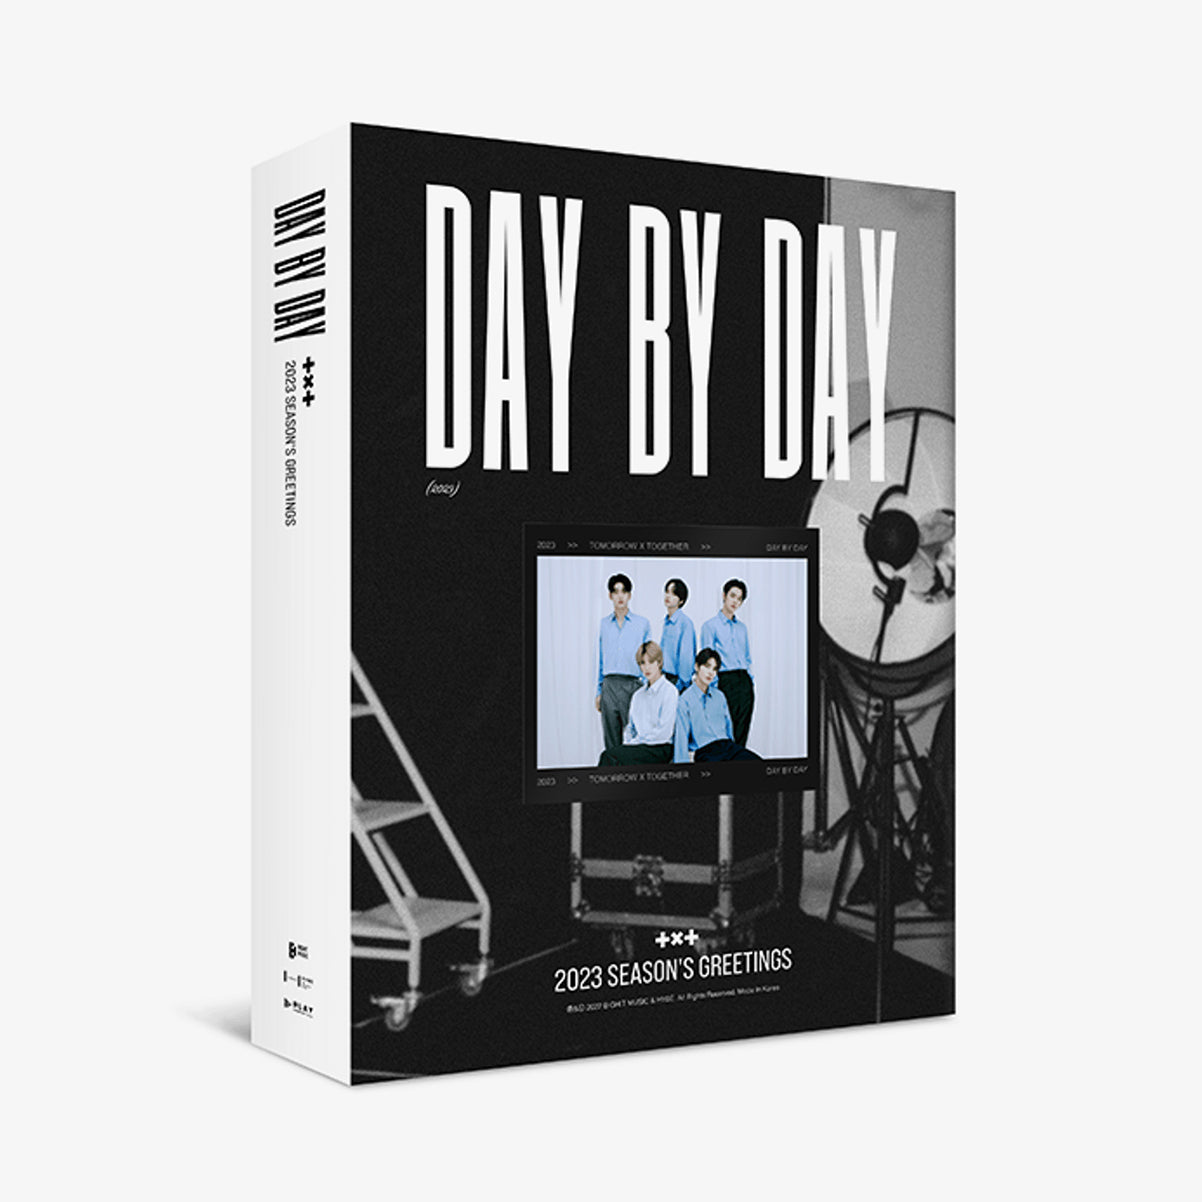 TOMORROW X TOGETHER (TXT) 2023 SEASON'S GREETINGS 'DAY BY DAY' cover